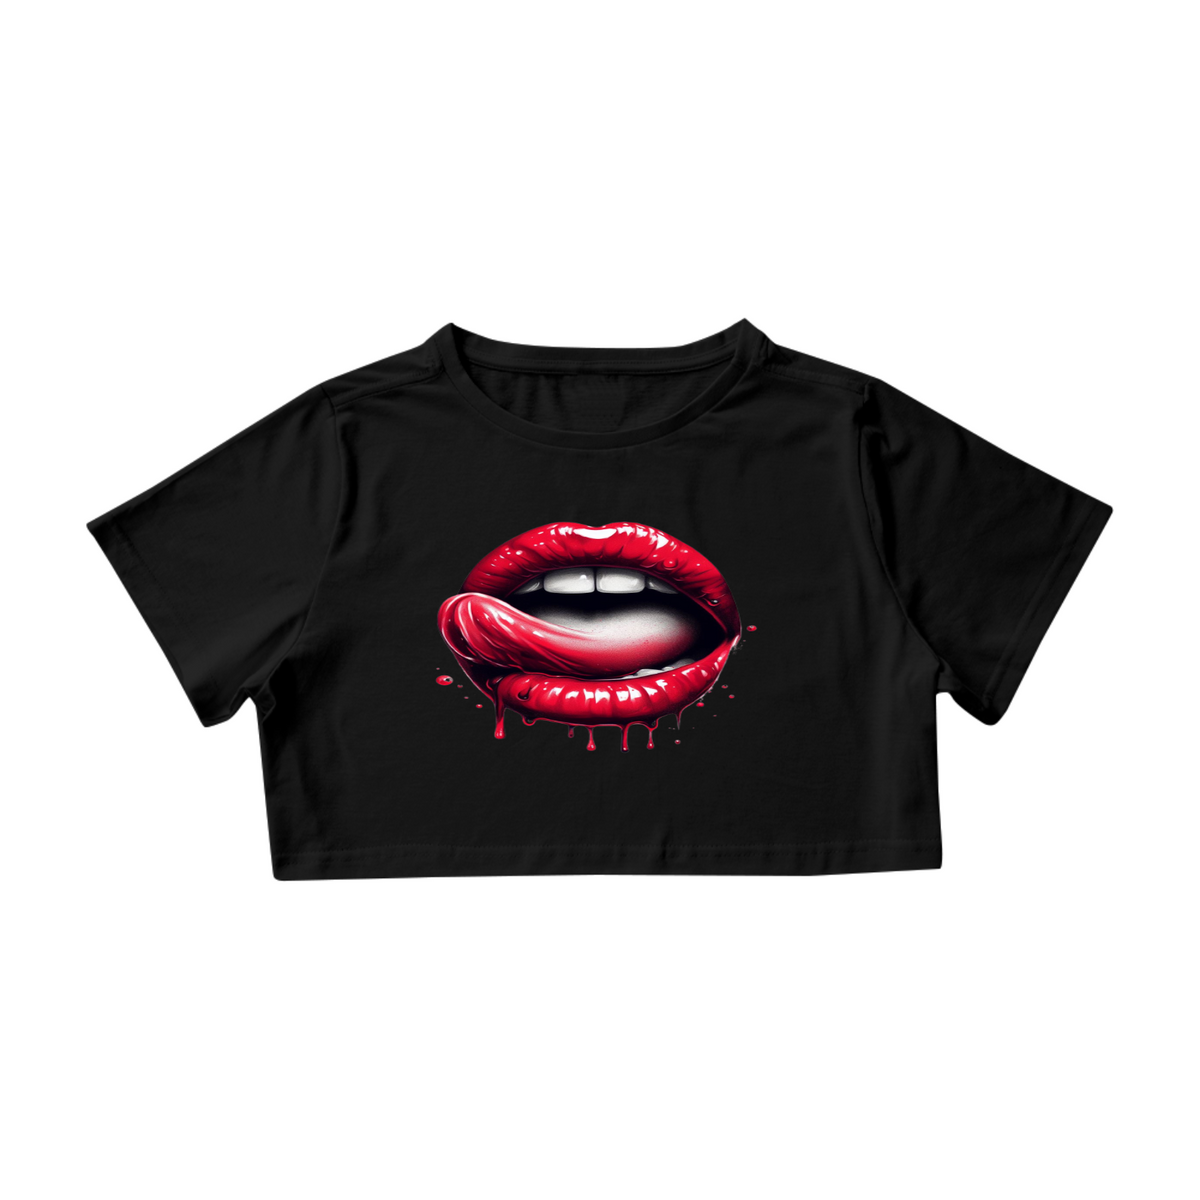 Nome do produto: Camisa Cropped (Blood Red Lips)